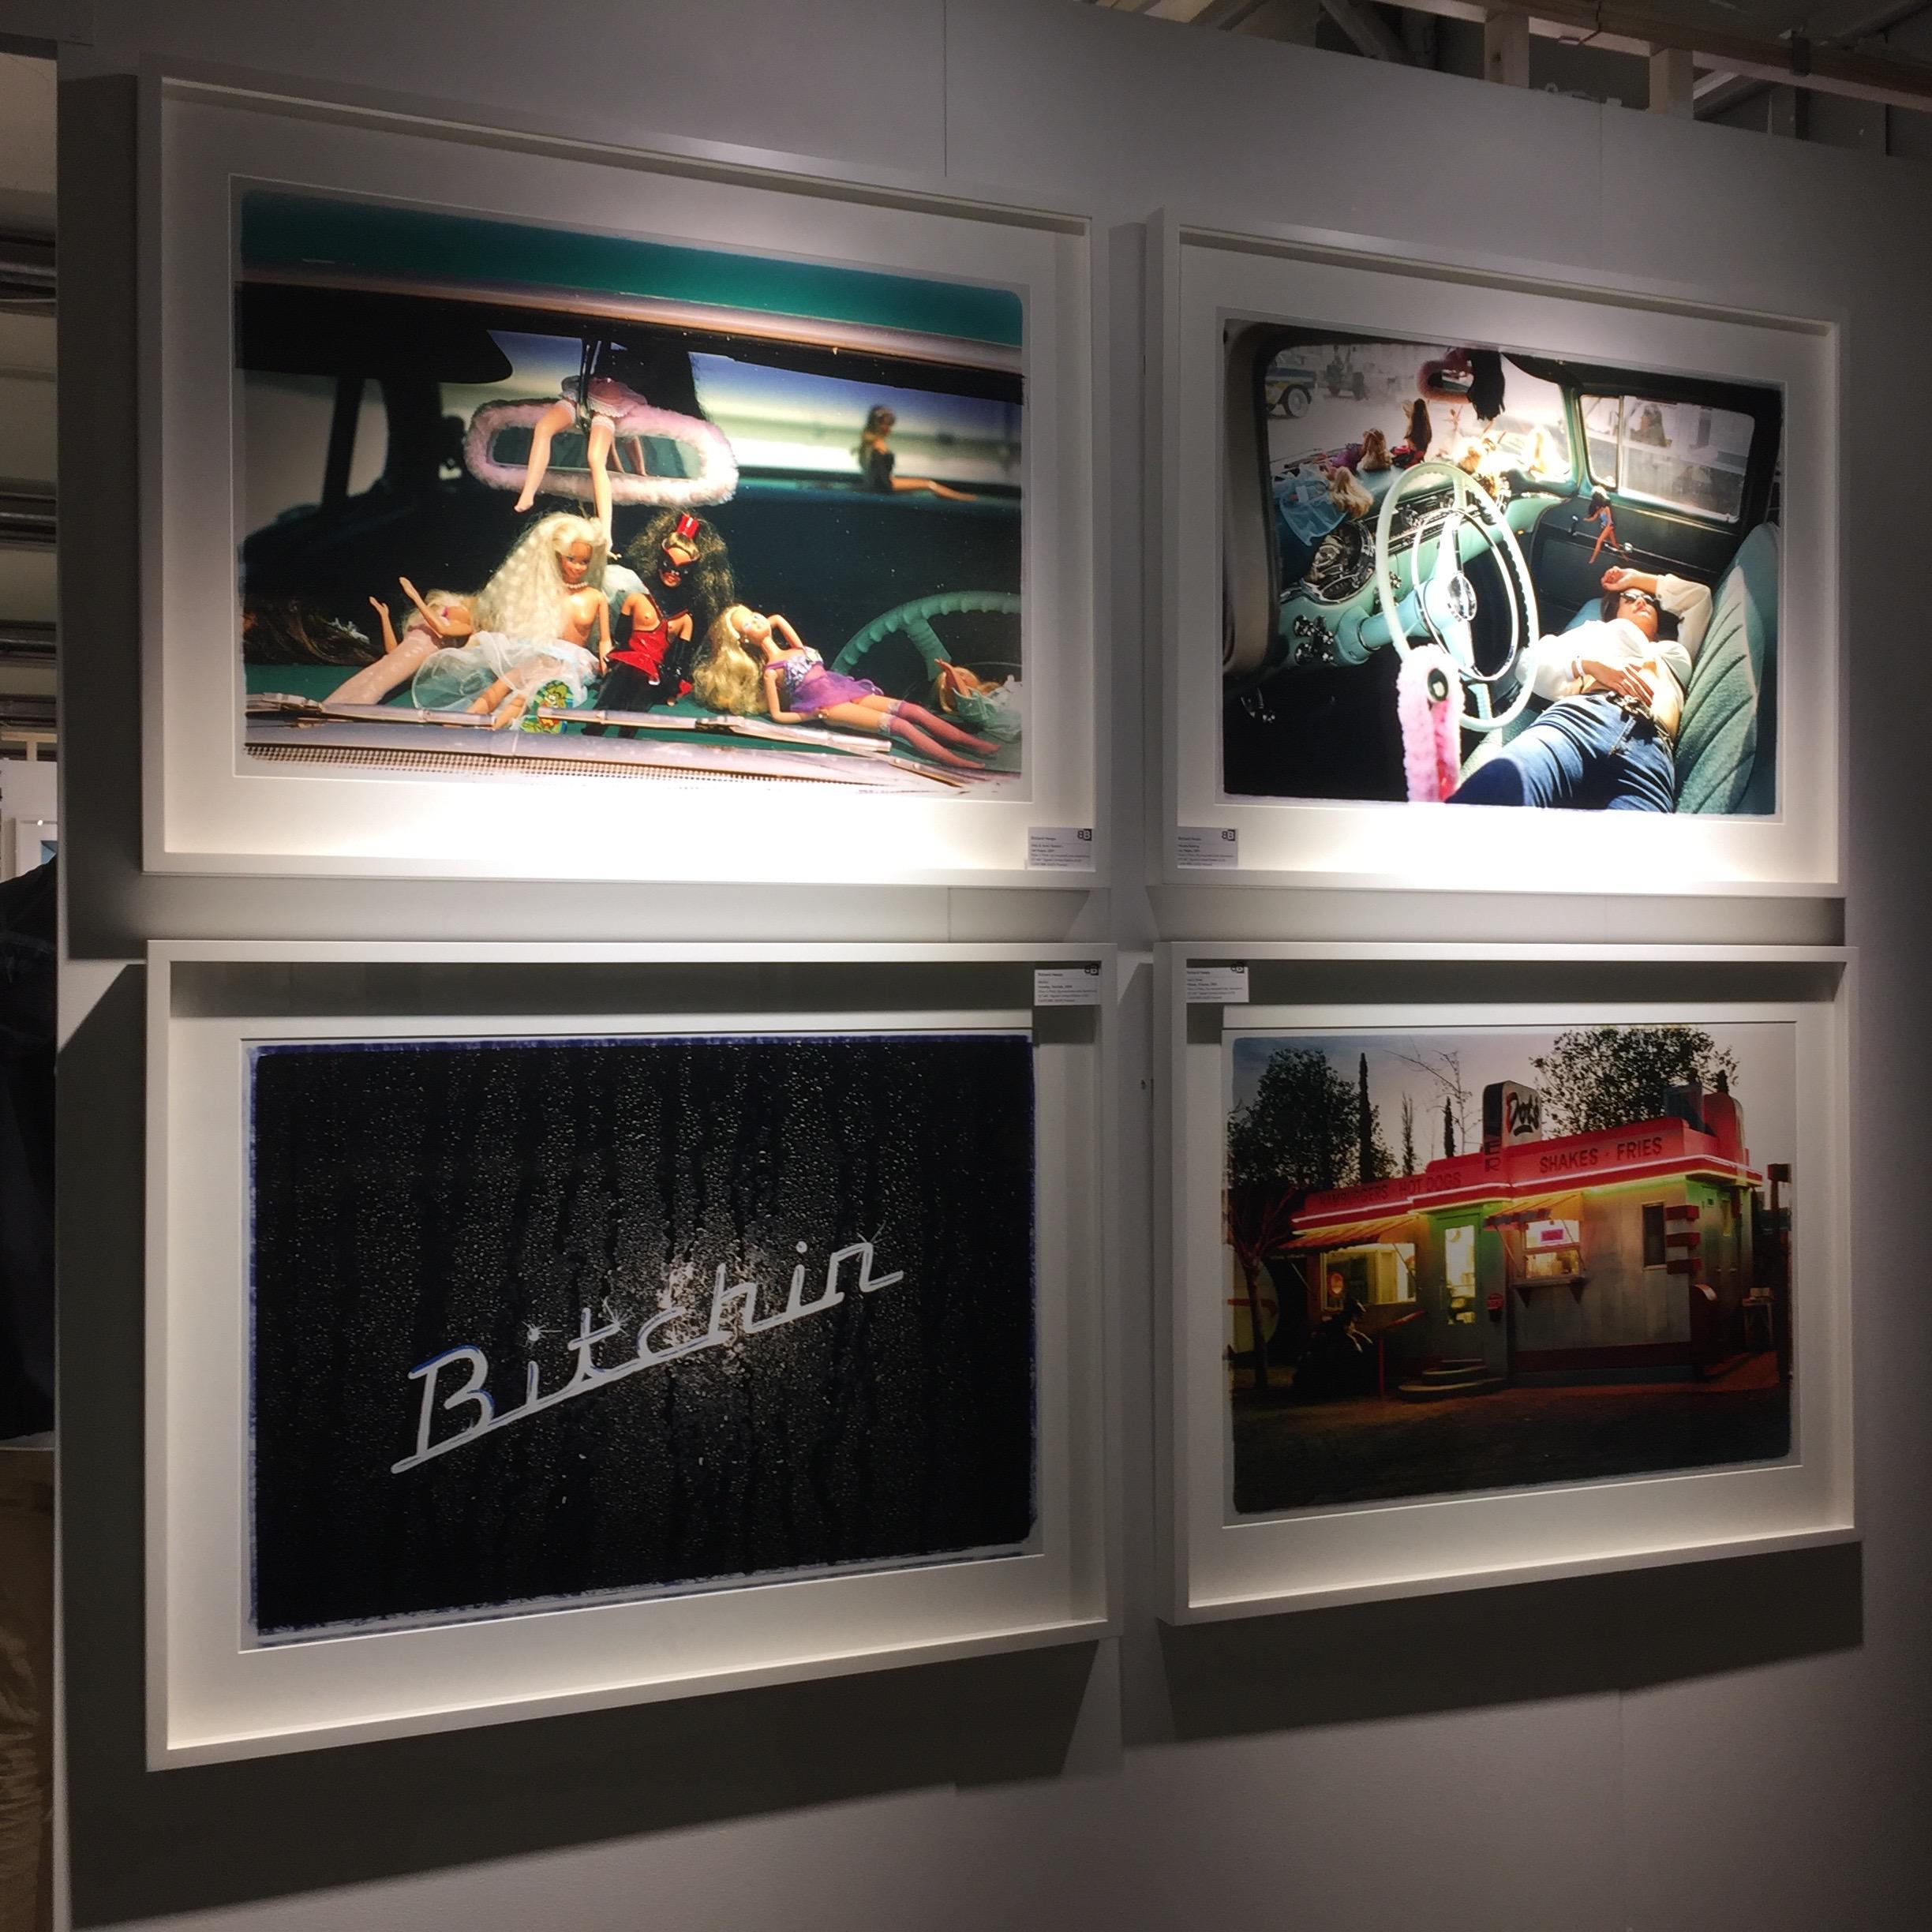 Part of Richard Heeps 'Man's Ruin' Series, and the sequence of artworks 'Wendy Flamin' Eyeball', 'Wendy Resting' & 'Oldsmobile and Sinful Barbie's' shot at the Rockabilly Weekender, Viva Las Vegas. Here this is a brilliantly adult version of the